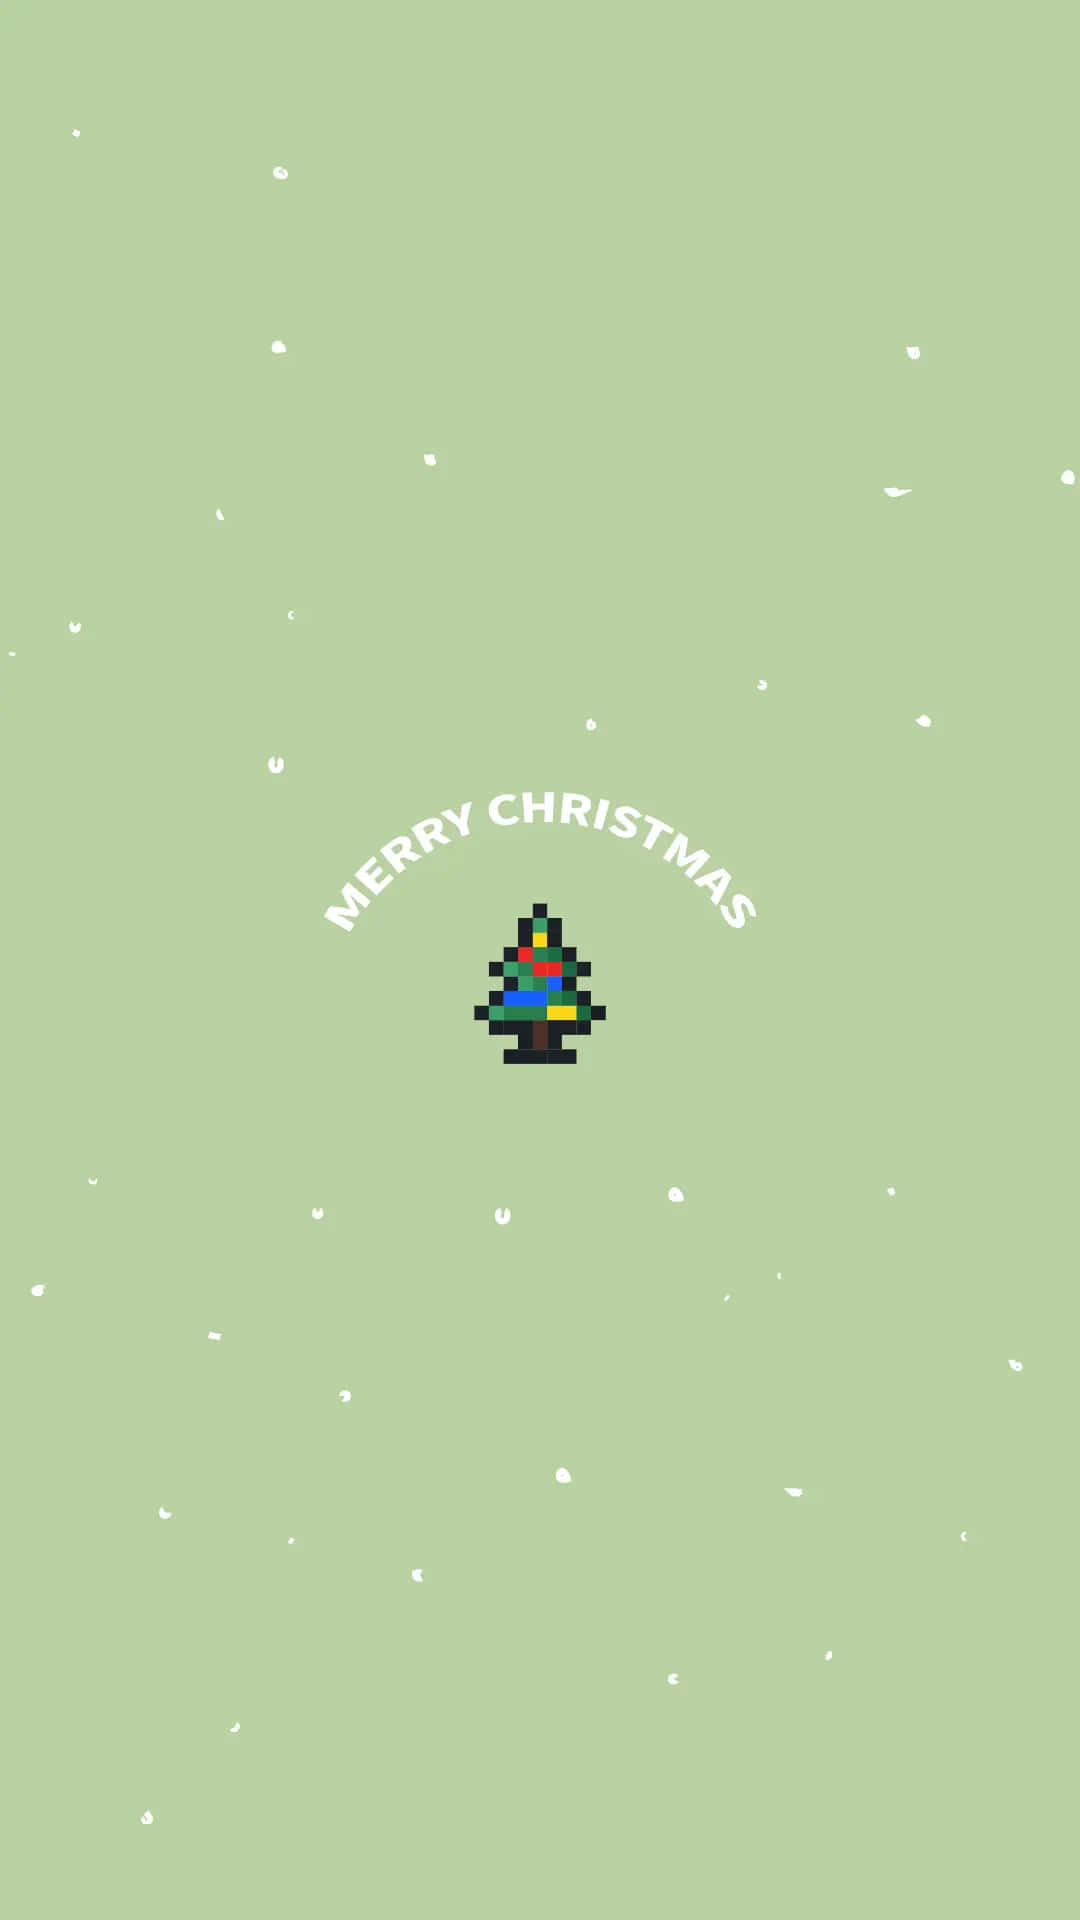 A cozy and merry Christmas Wallpaper